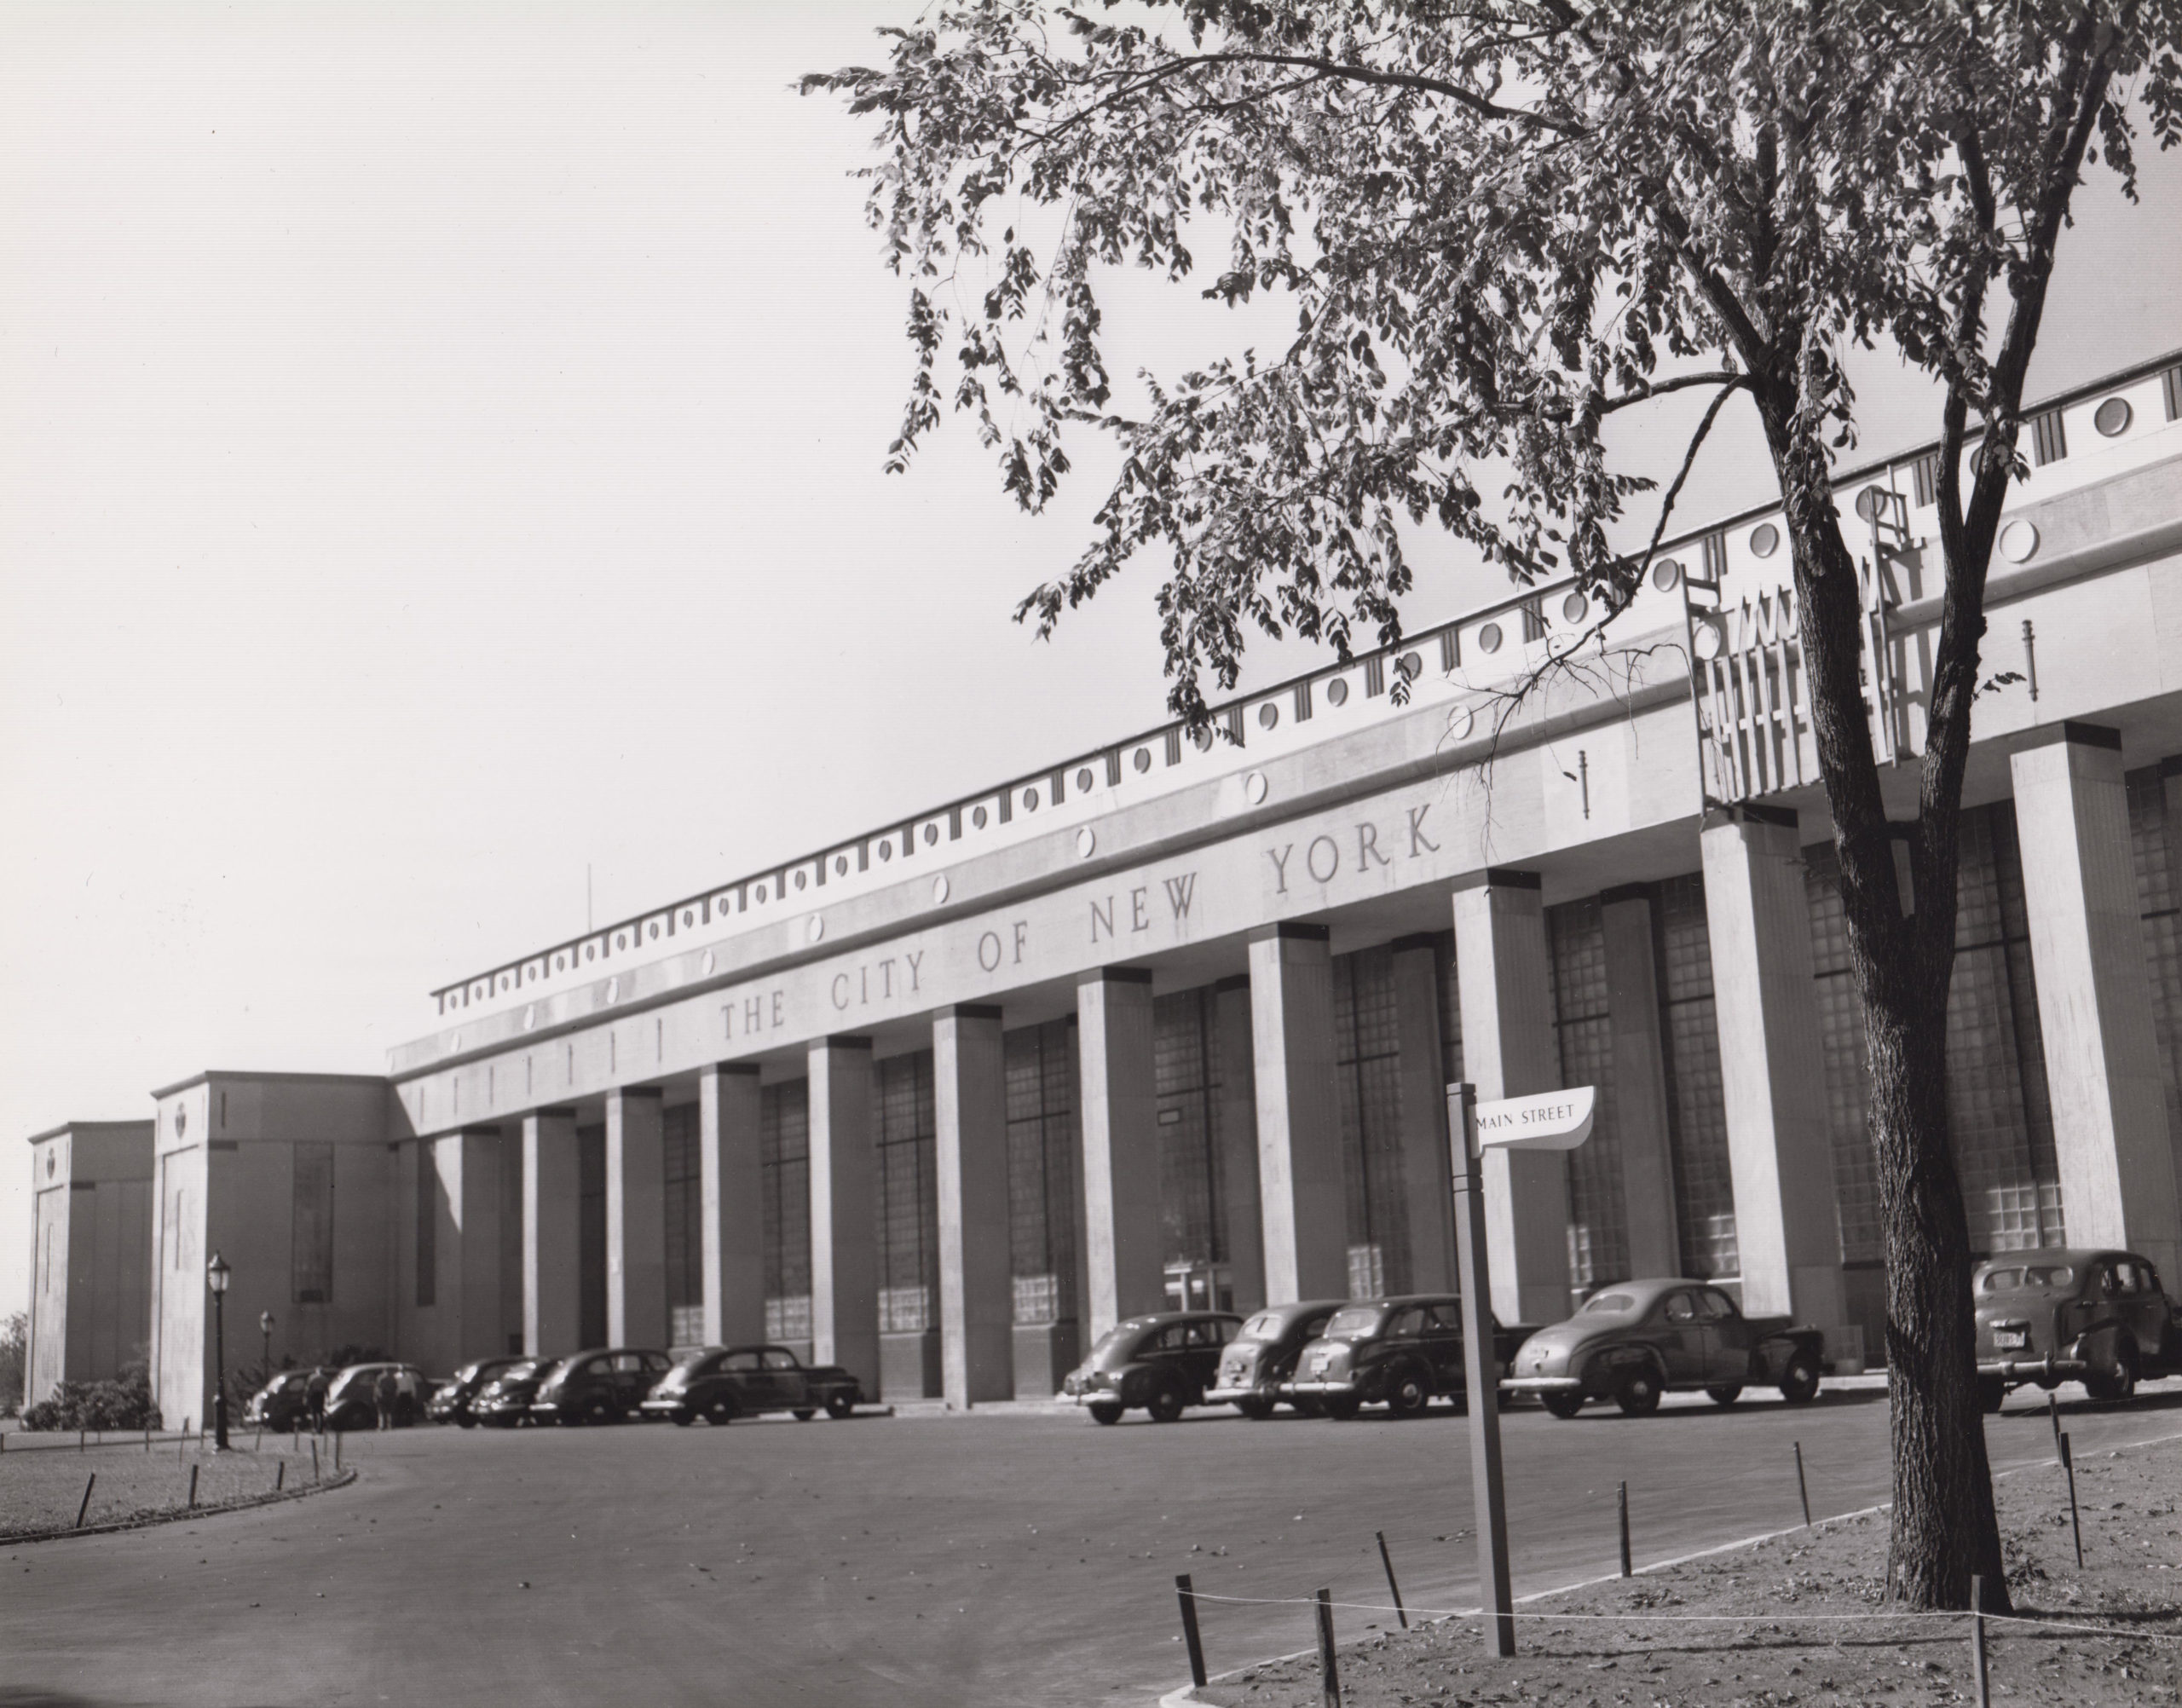 A black and white photo of the New York City Building. It has a long rectangular shape with a row of square columns. At the top of the building in uppercase font reads “THE CITY OF NEW YORK”. In the parking lot, in front of the building, are nine cars parked in a row and a street sign, to the right, that reads “MAIN STREET '' in uppercase font.